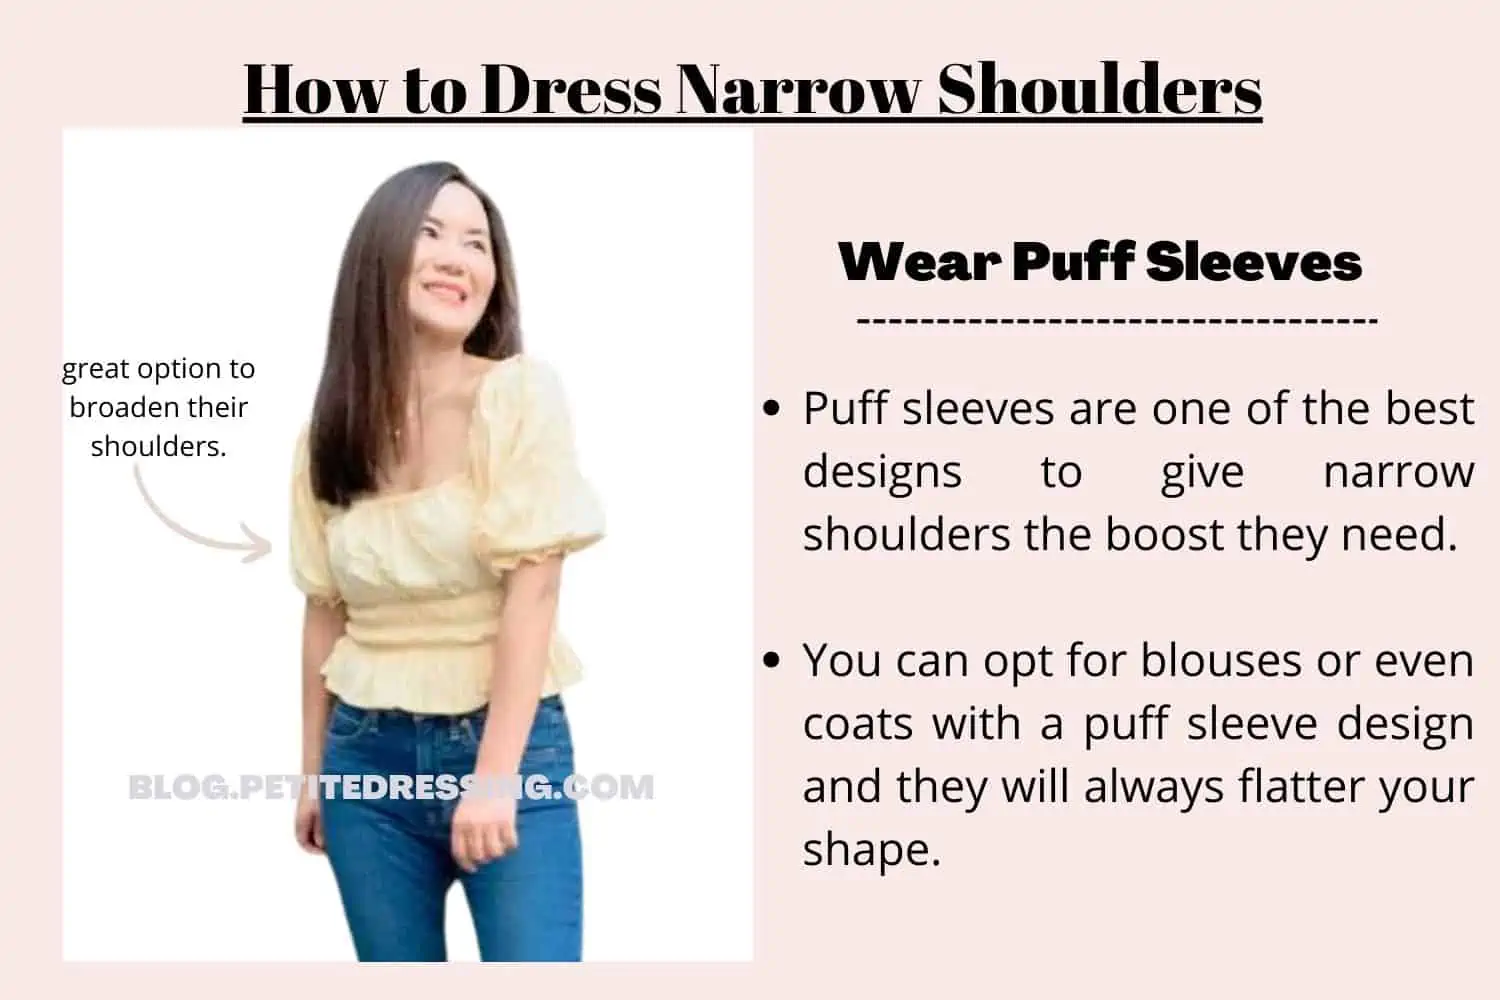 Some tips for narrow shoulders🥰 they may/may not work for you and